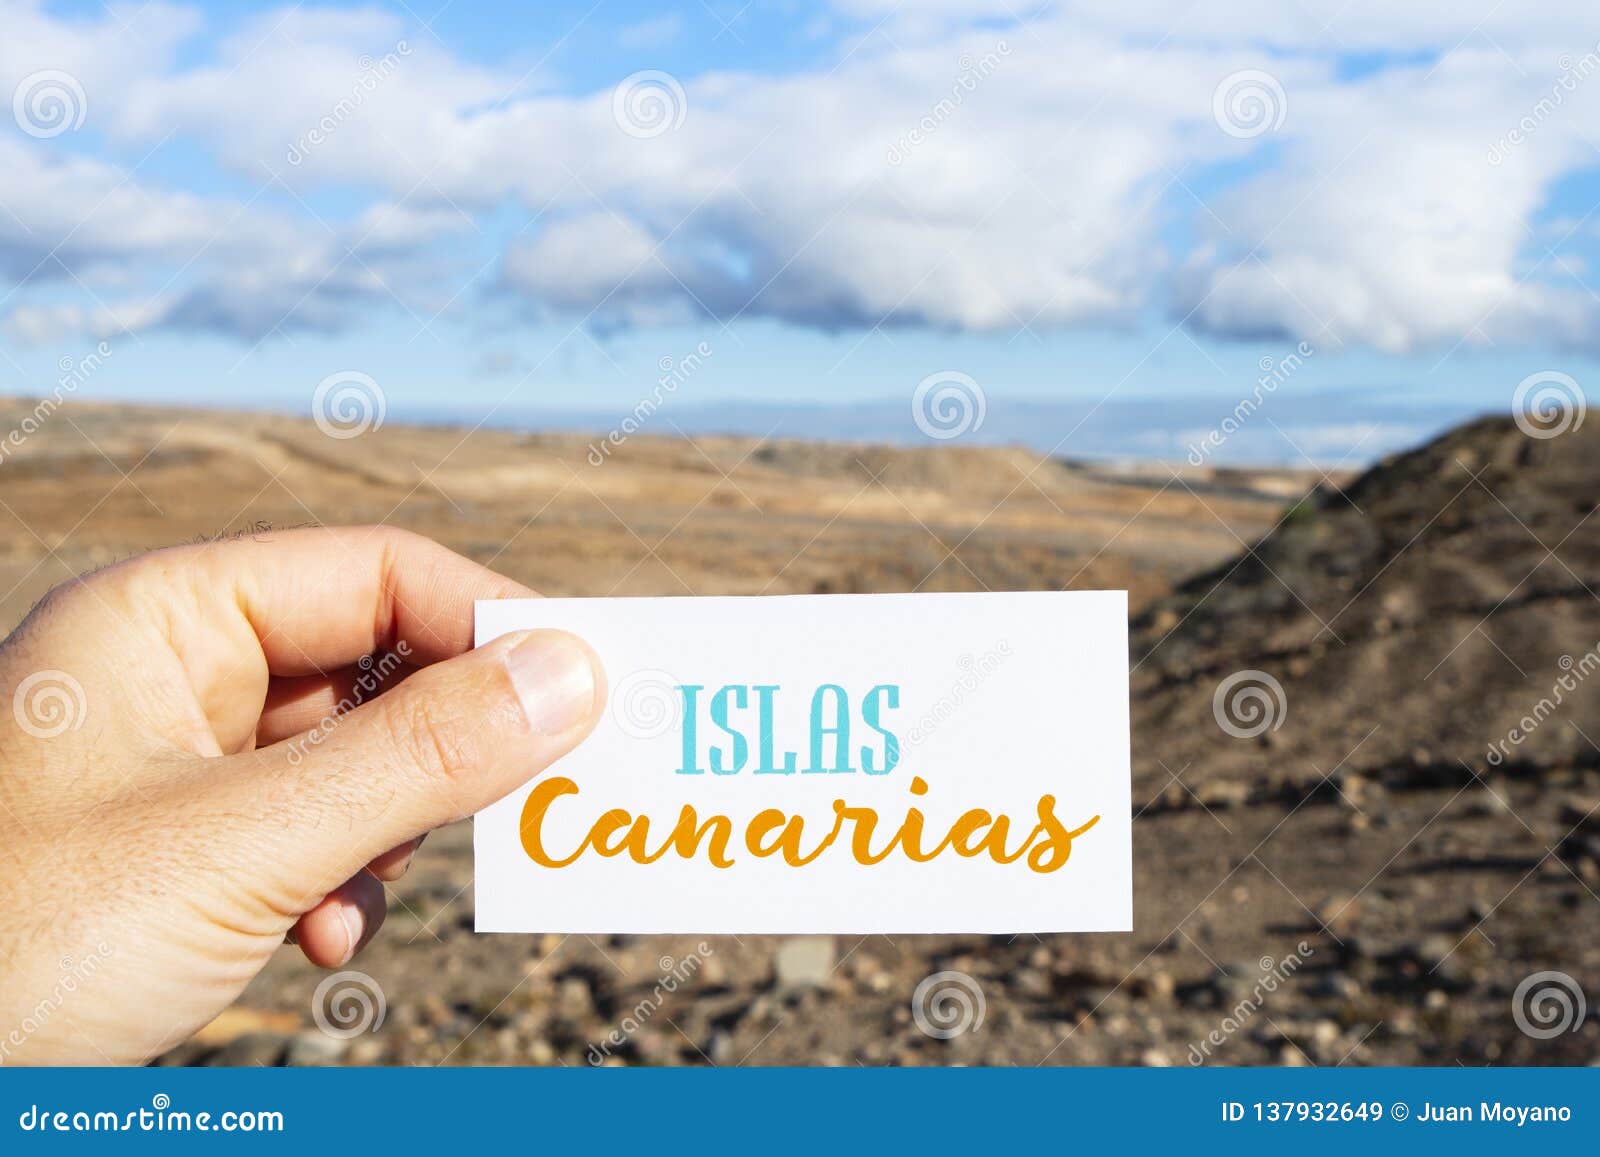 text canary islands in signboard in dry landscape